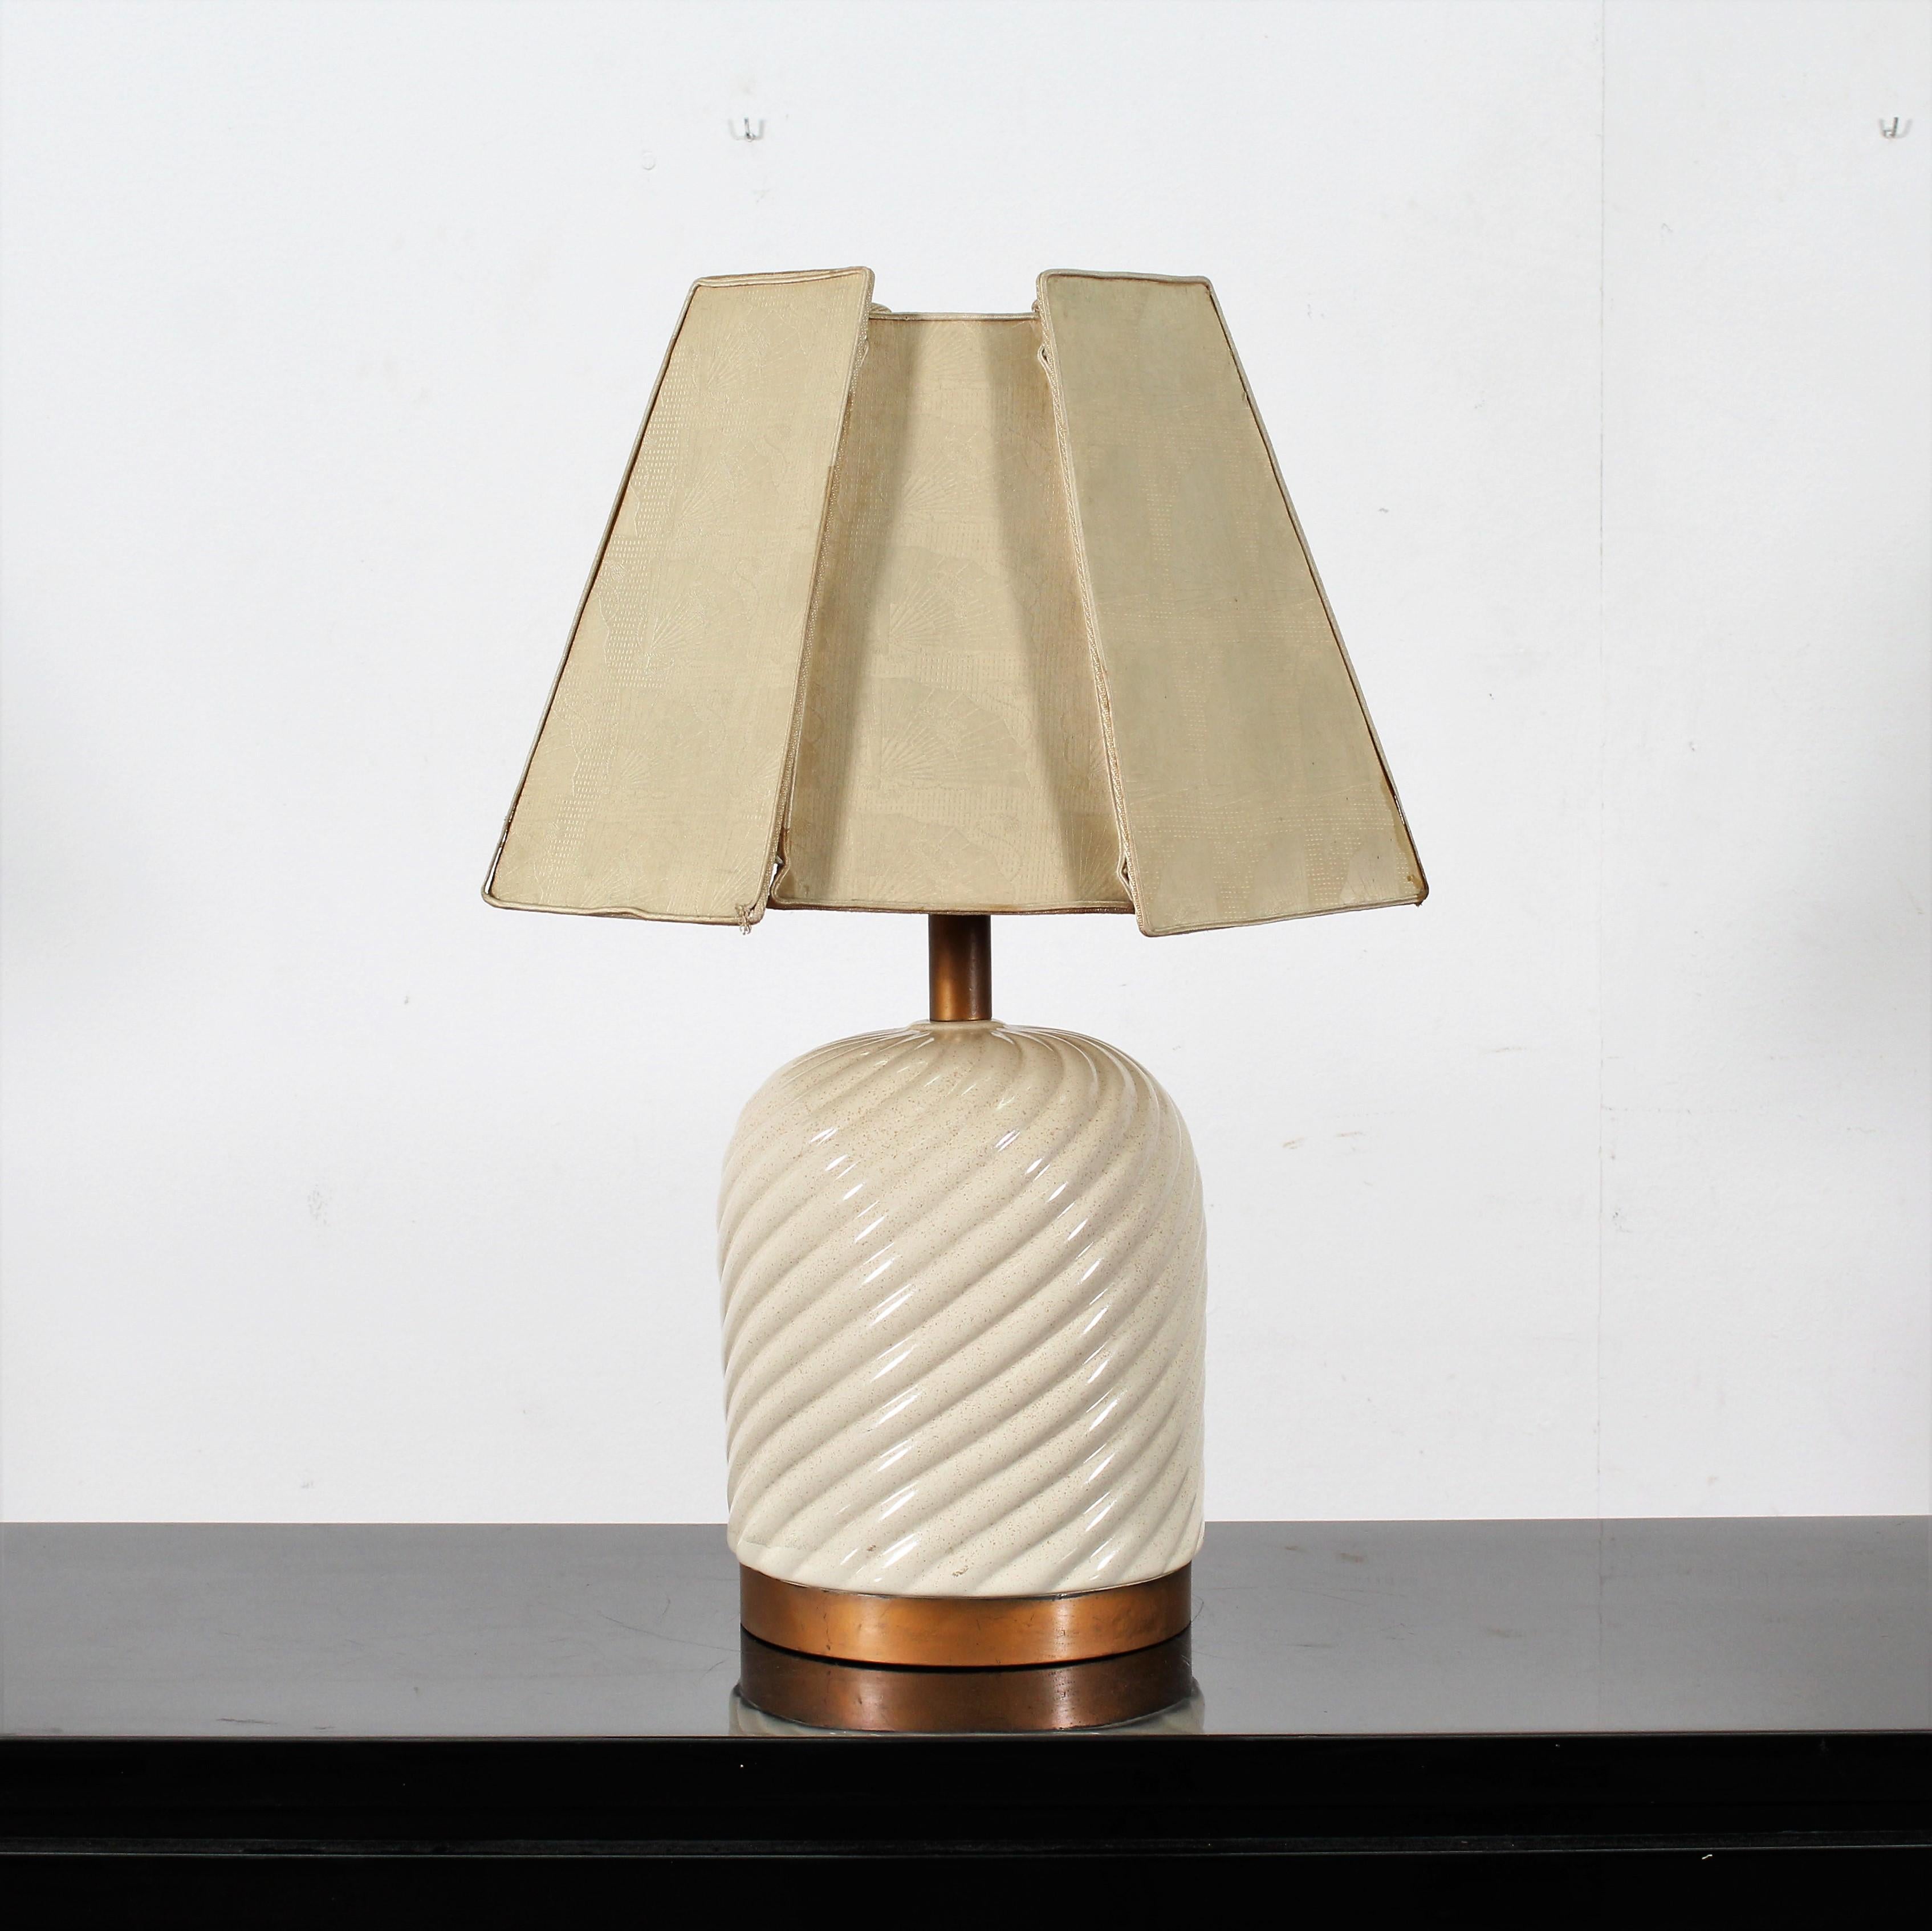 Table lamp designed by Tommaso Barbi and manufactured in Italy in 1970. The piece features a spiral ceramic structure with a brass base, fabric shade, and the manufacturers mark and label to the internal section.
Wear consistent with age and use.